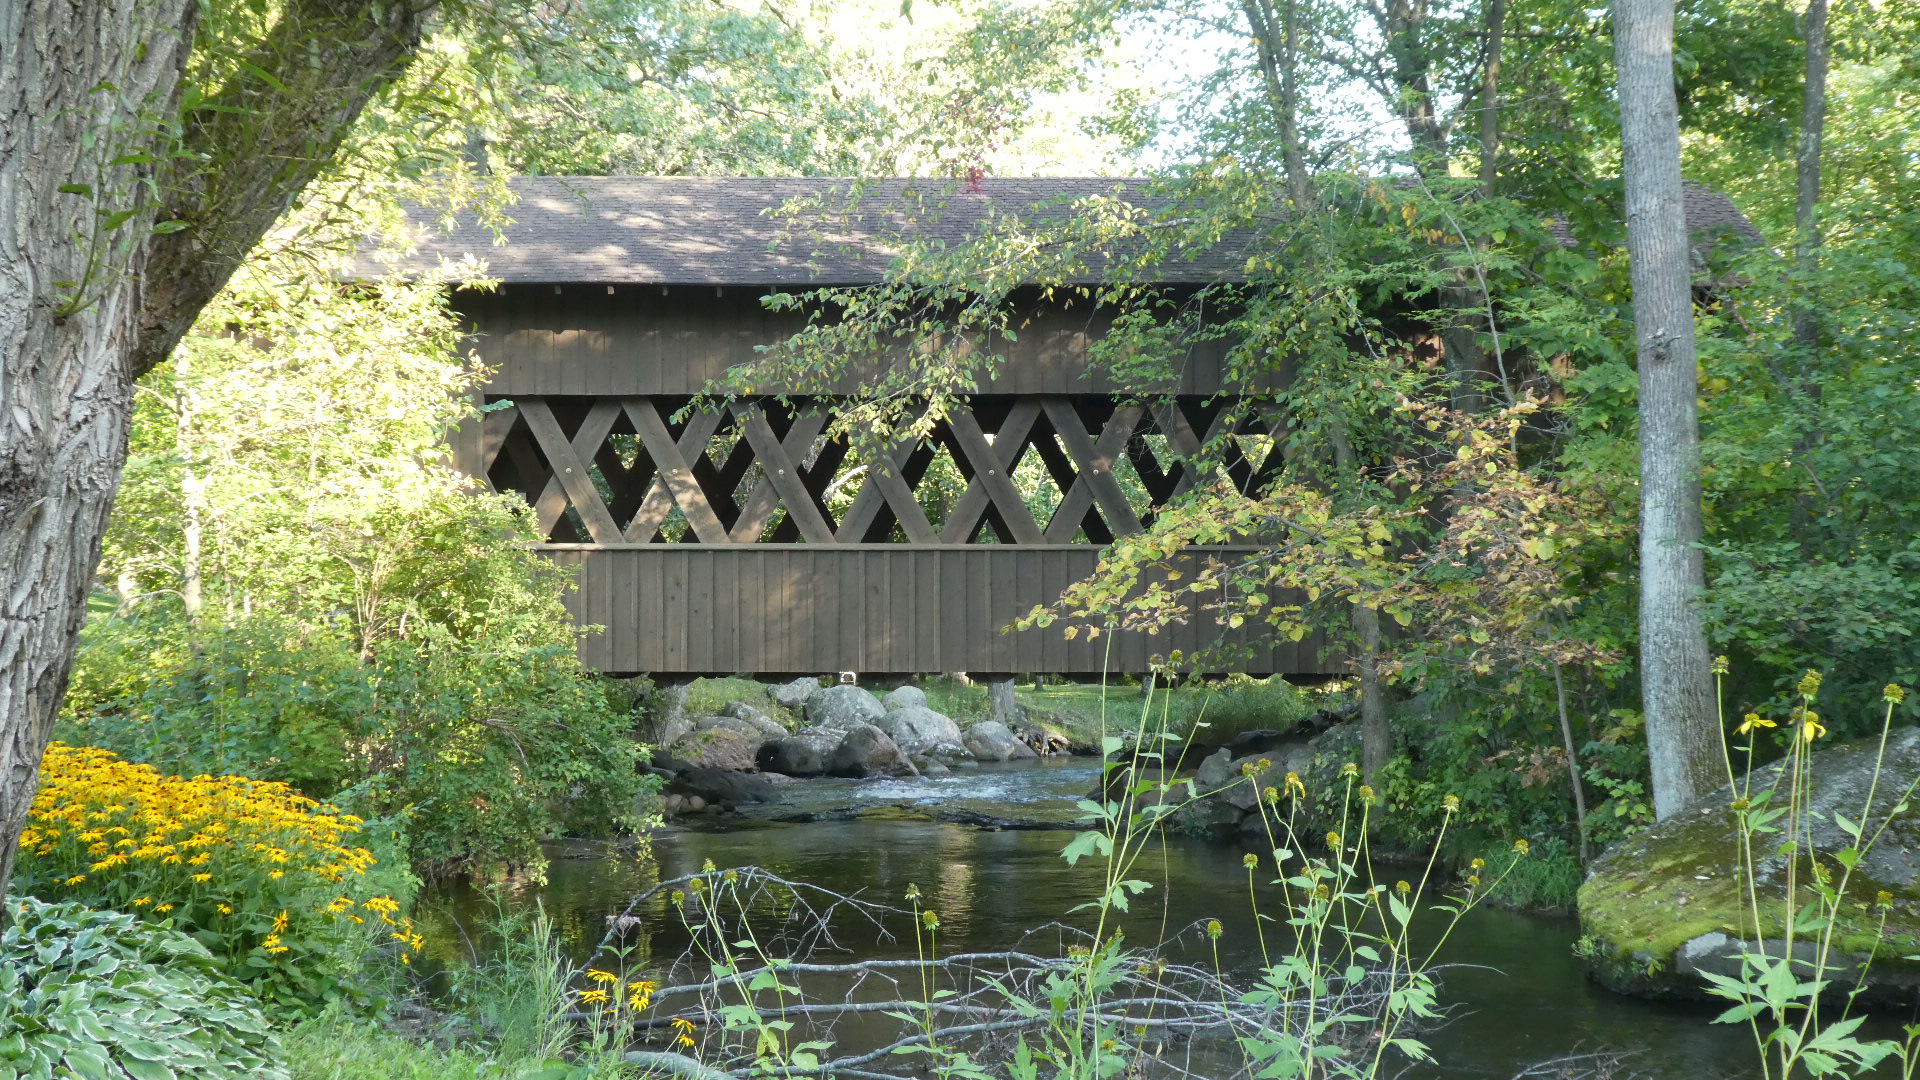 Covered Bridge just
                    outside Saxeville